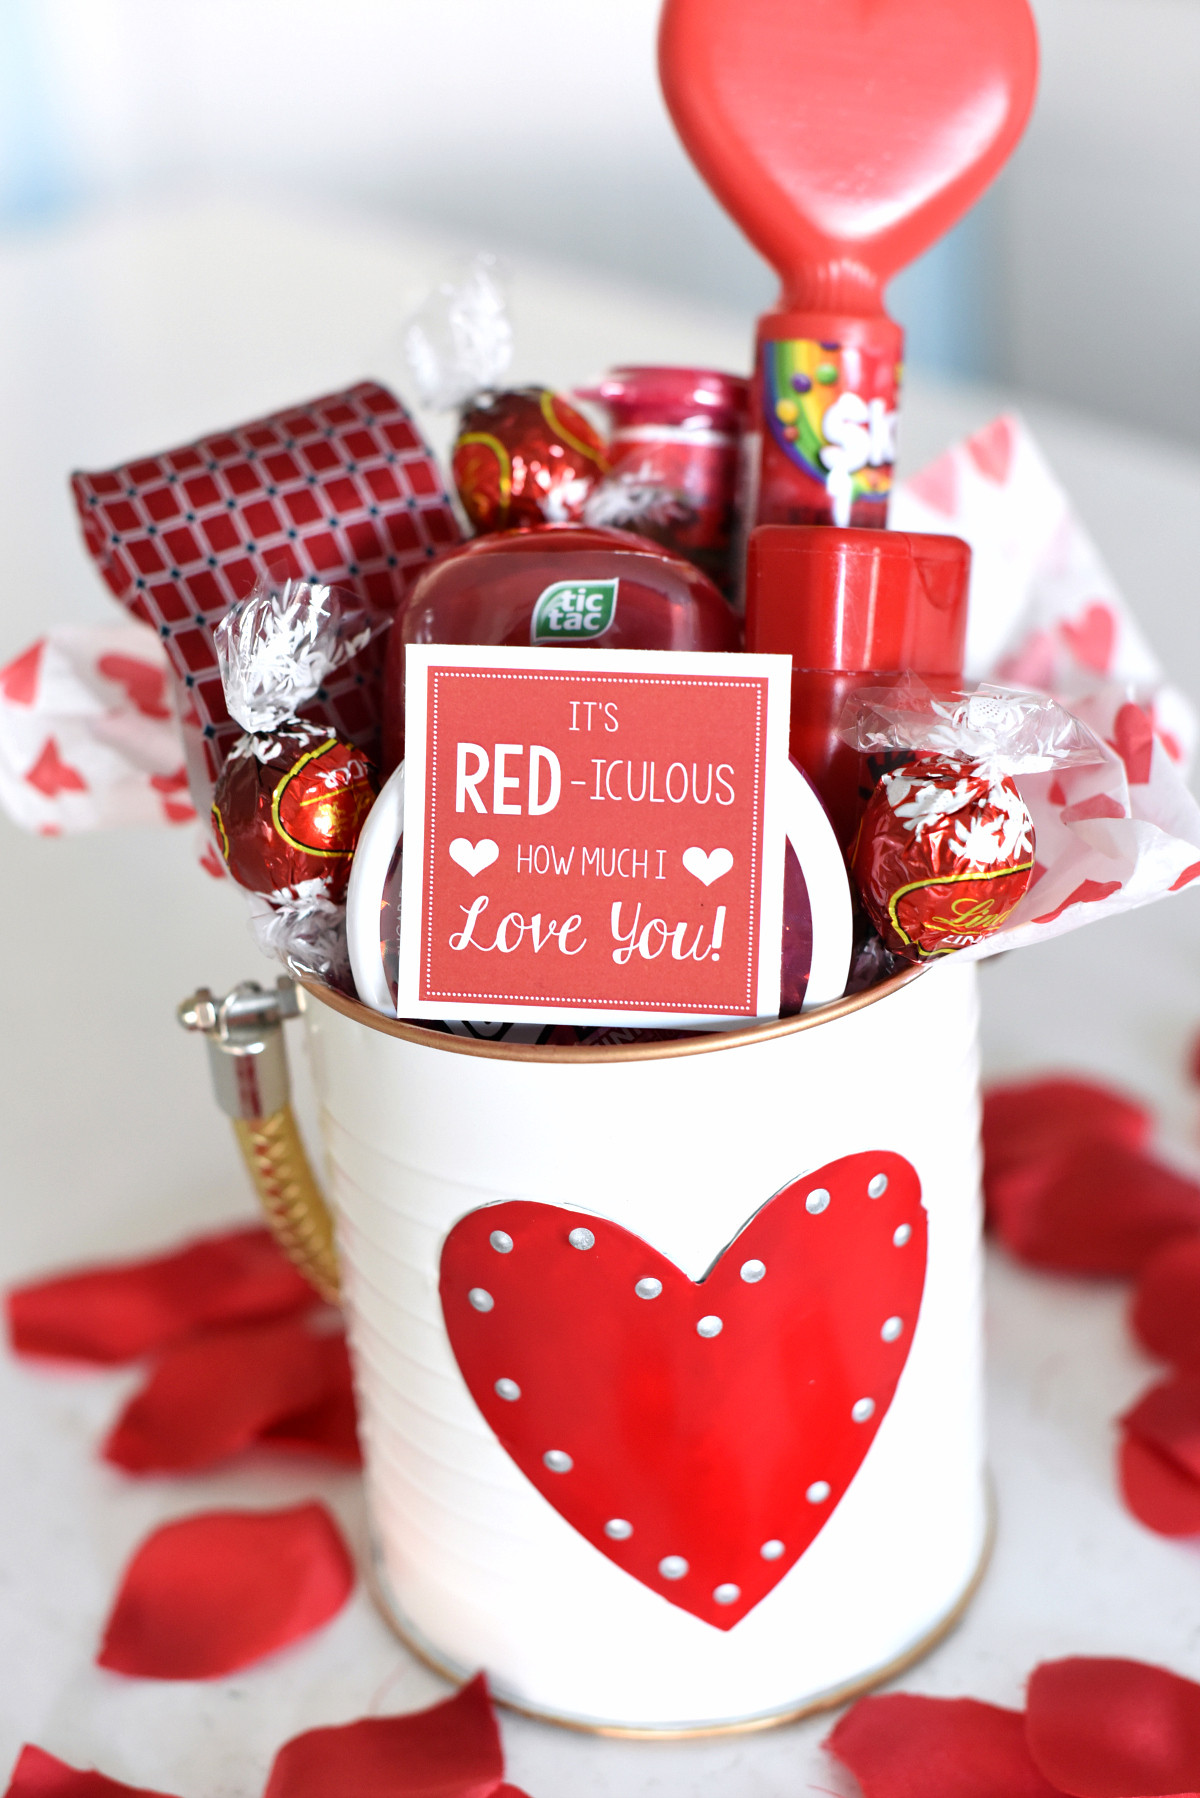 Valentines Gift Ideas For Him Pinterest
 Cute Valentine s Day Gift Idea RED iculous Basket